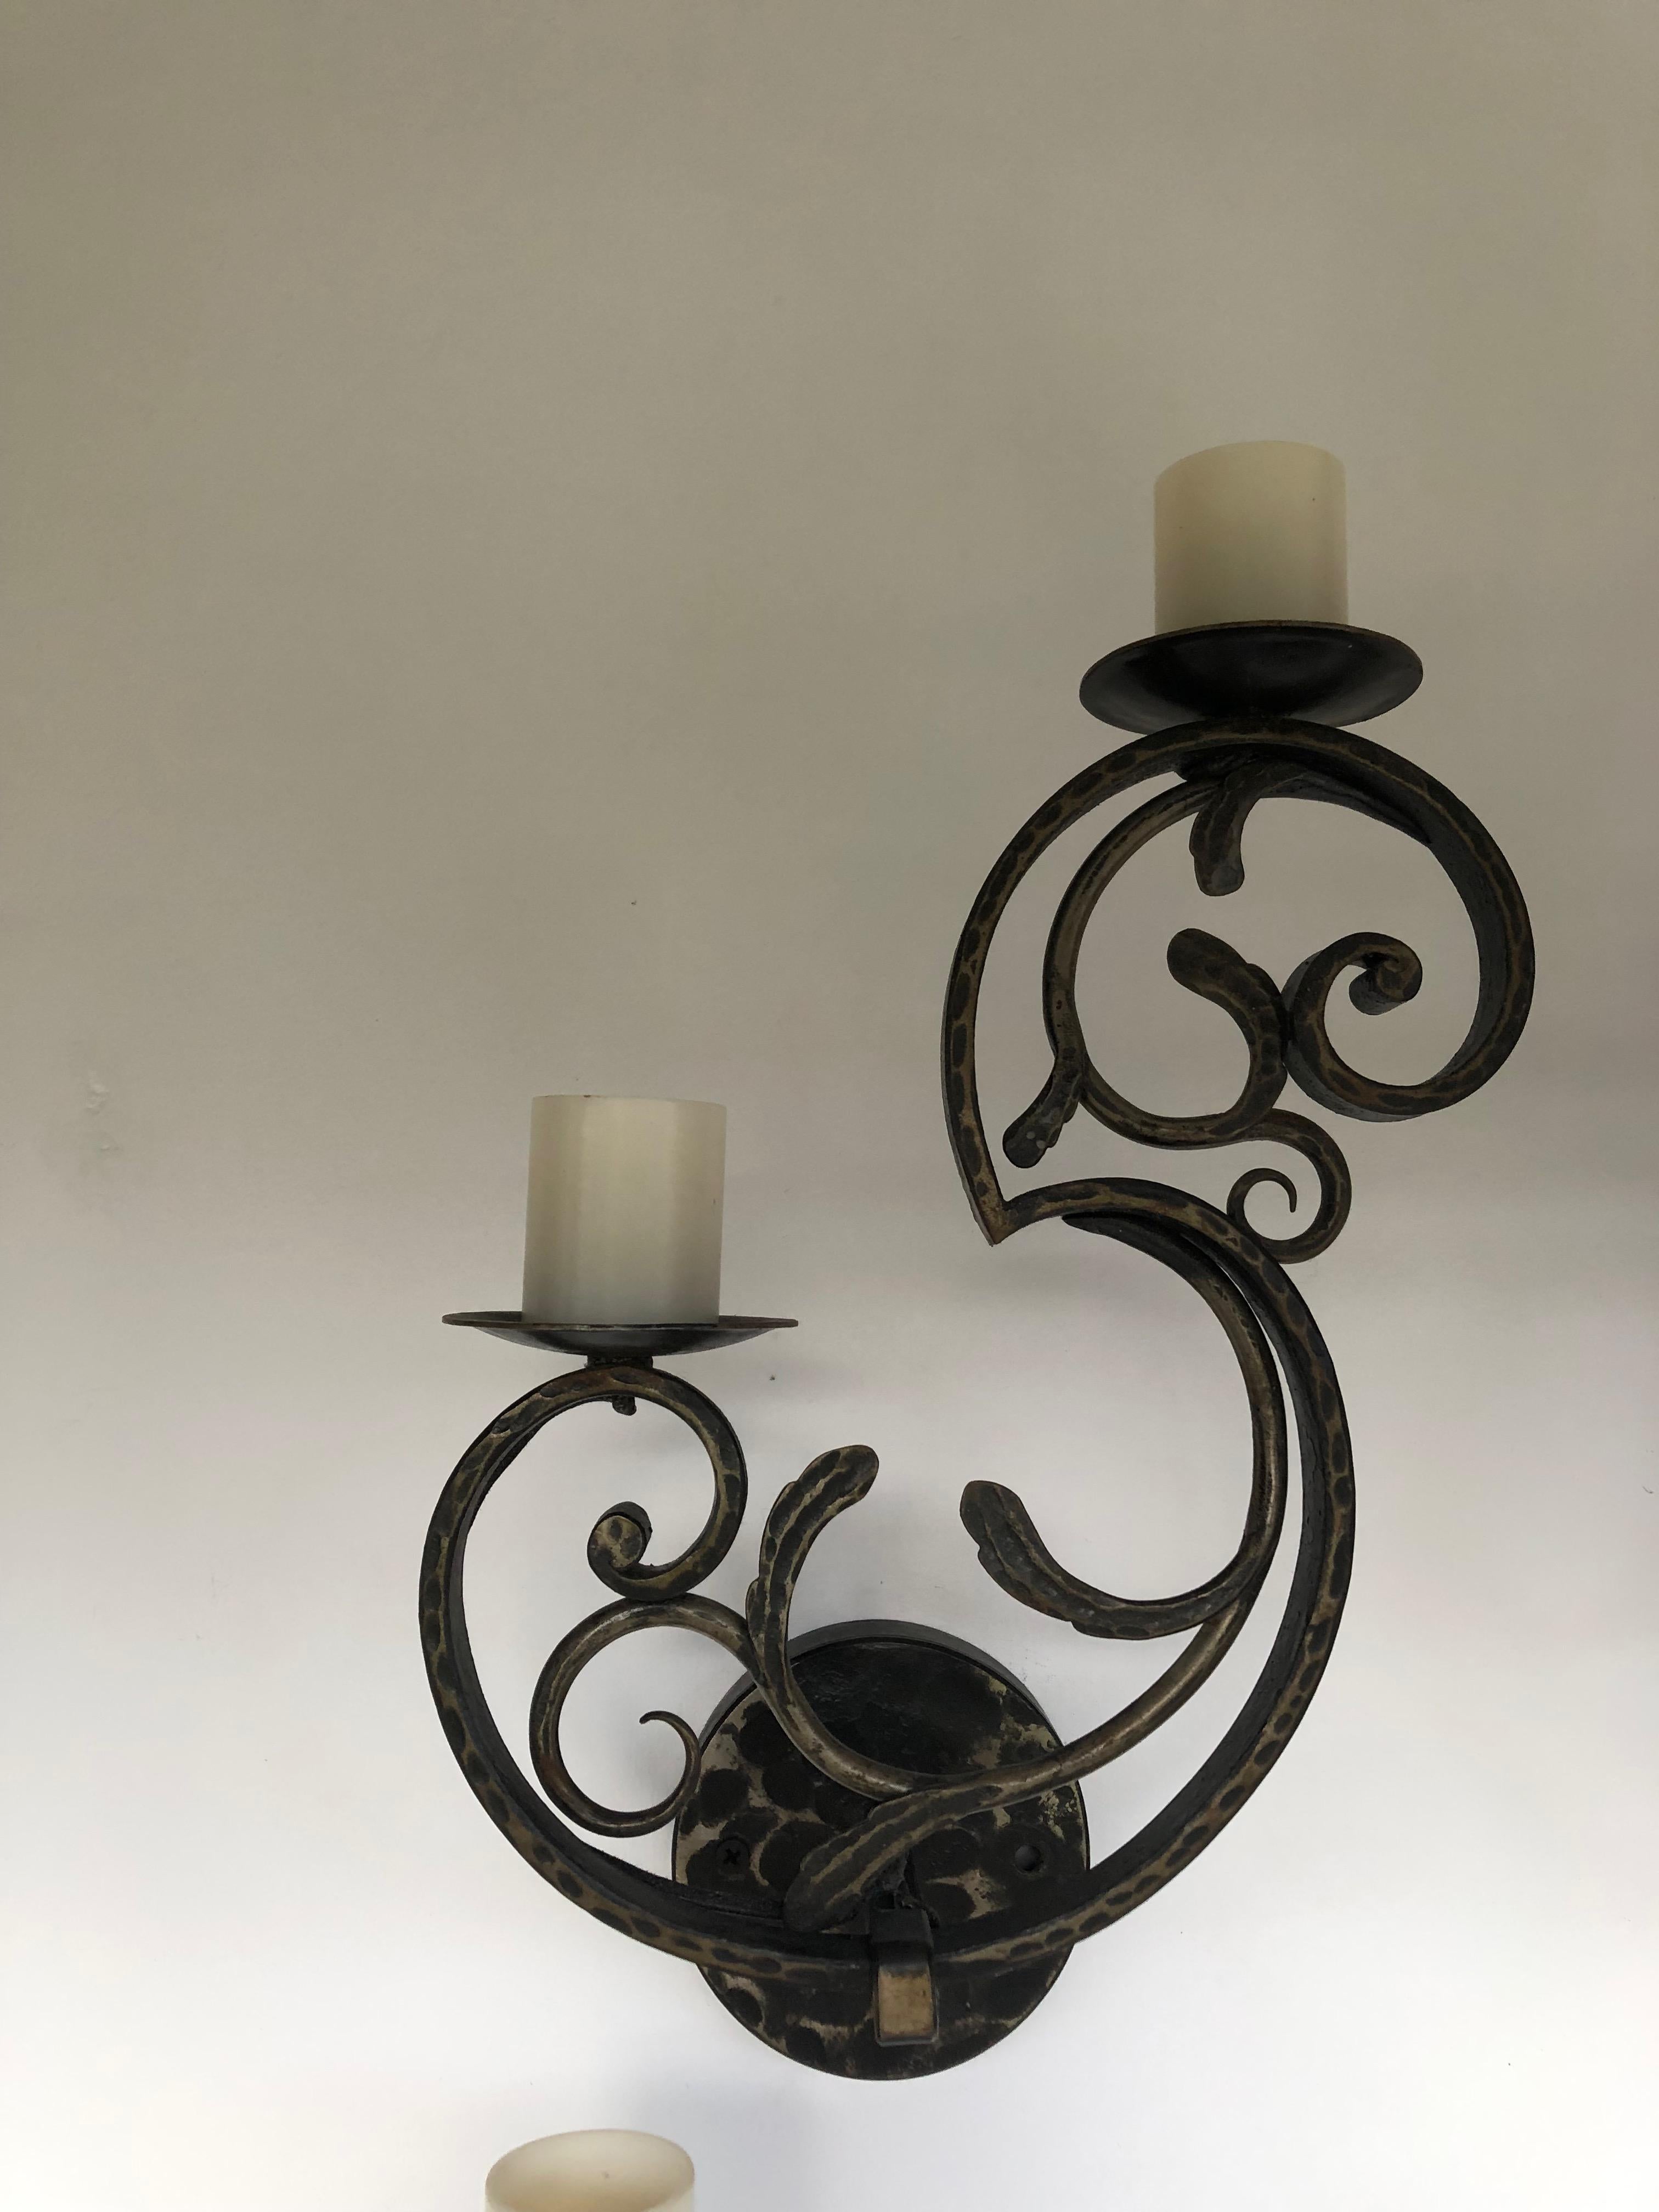 Zadounaïsky Suite of 4 Art Deco Wall Lights 

Elegant Art Deco sconces, circa 1930, in wrought iron.
Electrified and in perfect condition. Mounted with lampshade clipped on the bulb.
The 4 sconces are stamped Zadounaisky

Height : 33 cm
Width : 22